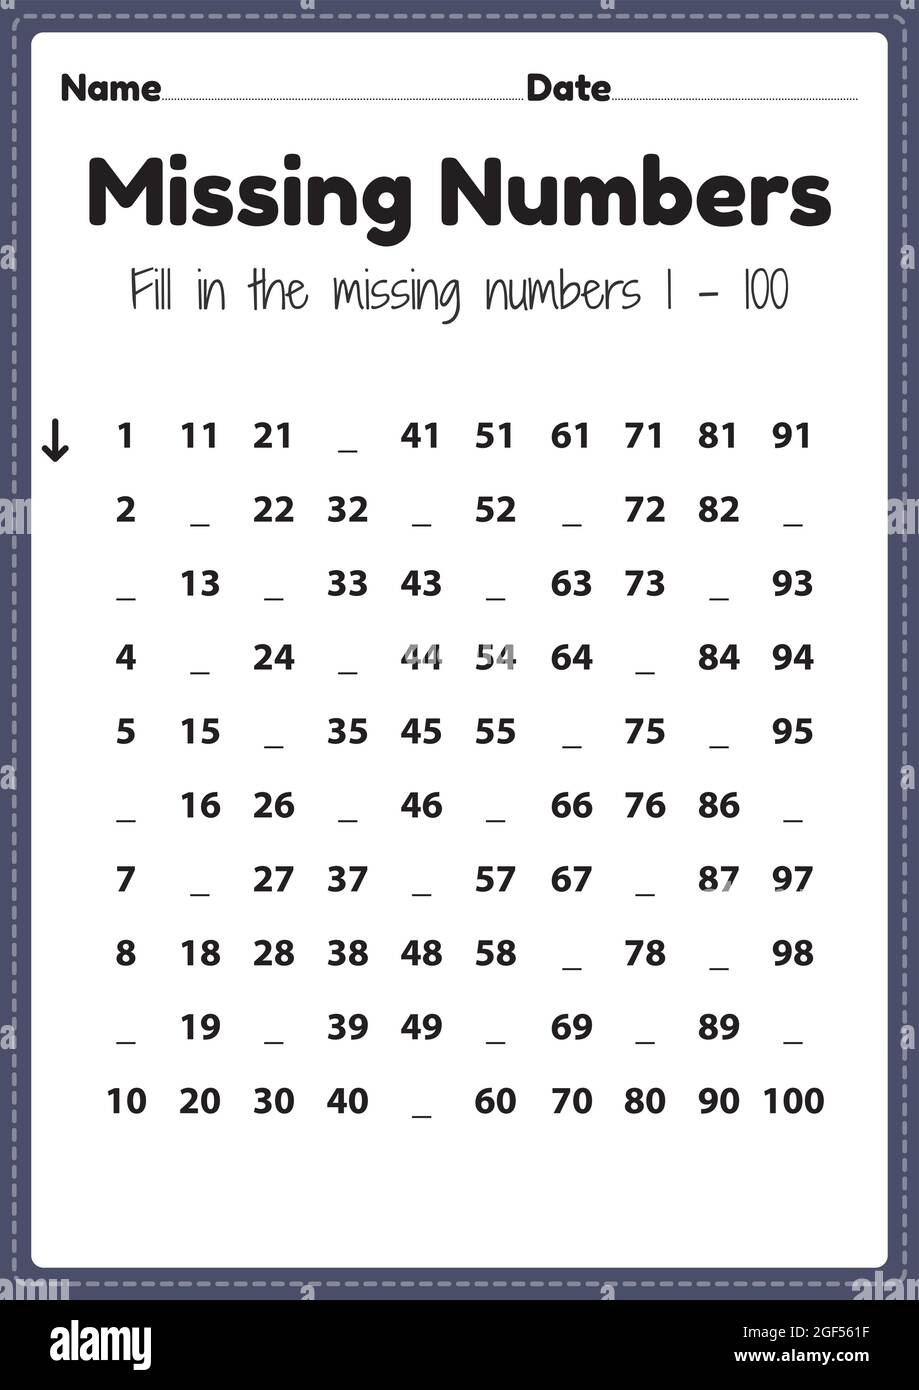 maths worksheet for nursery missing numbers 1 to 100 printable sheet for preschool and kindergarten kids activity to learn basic mathematics skills stock vector image art alamy